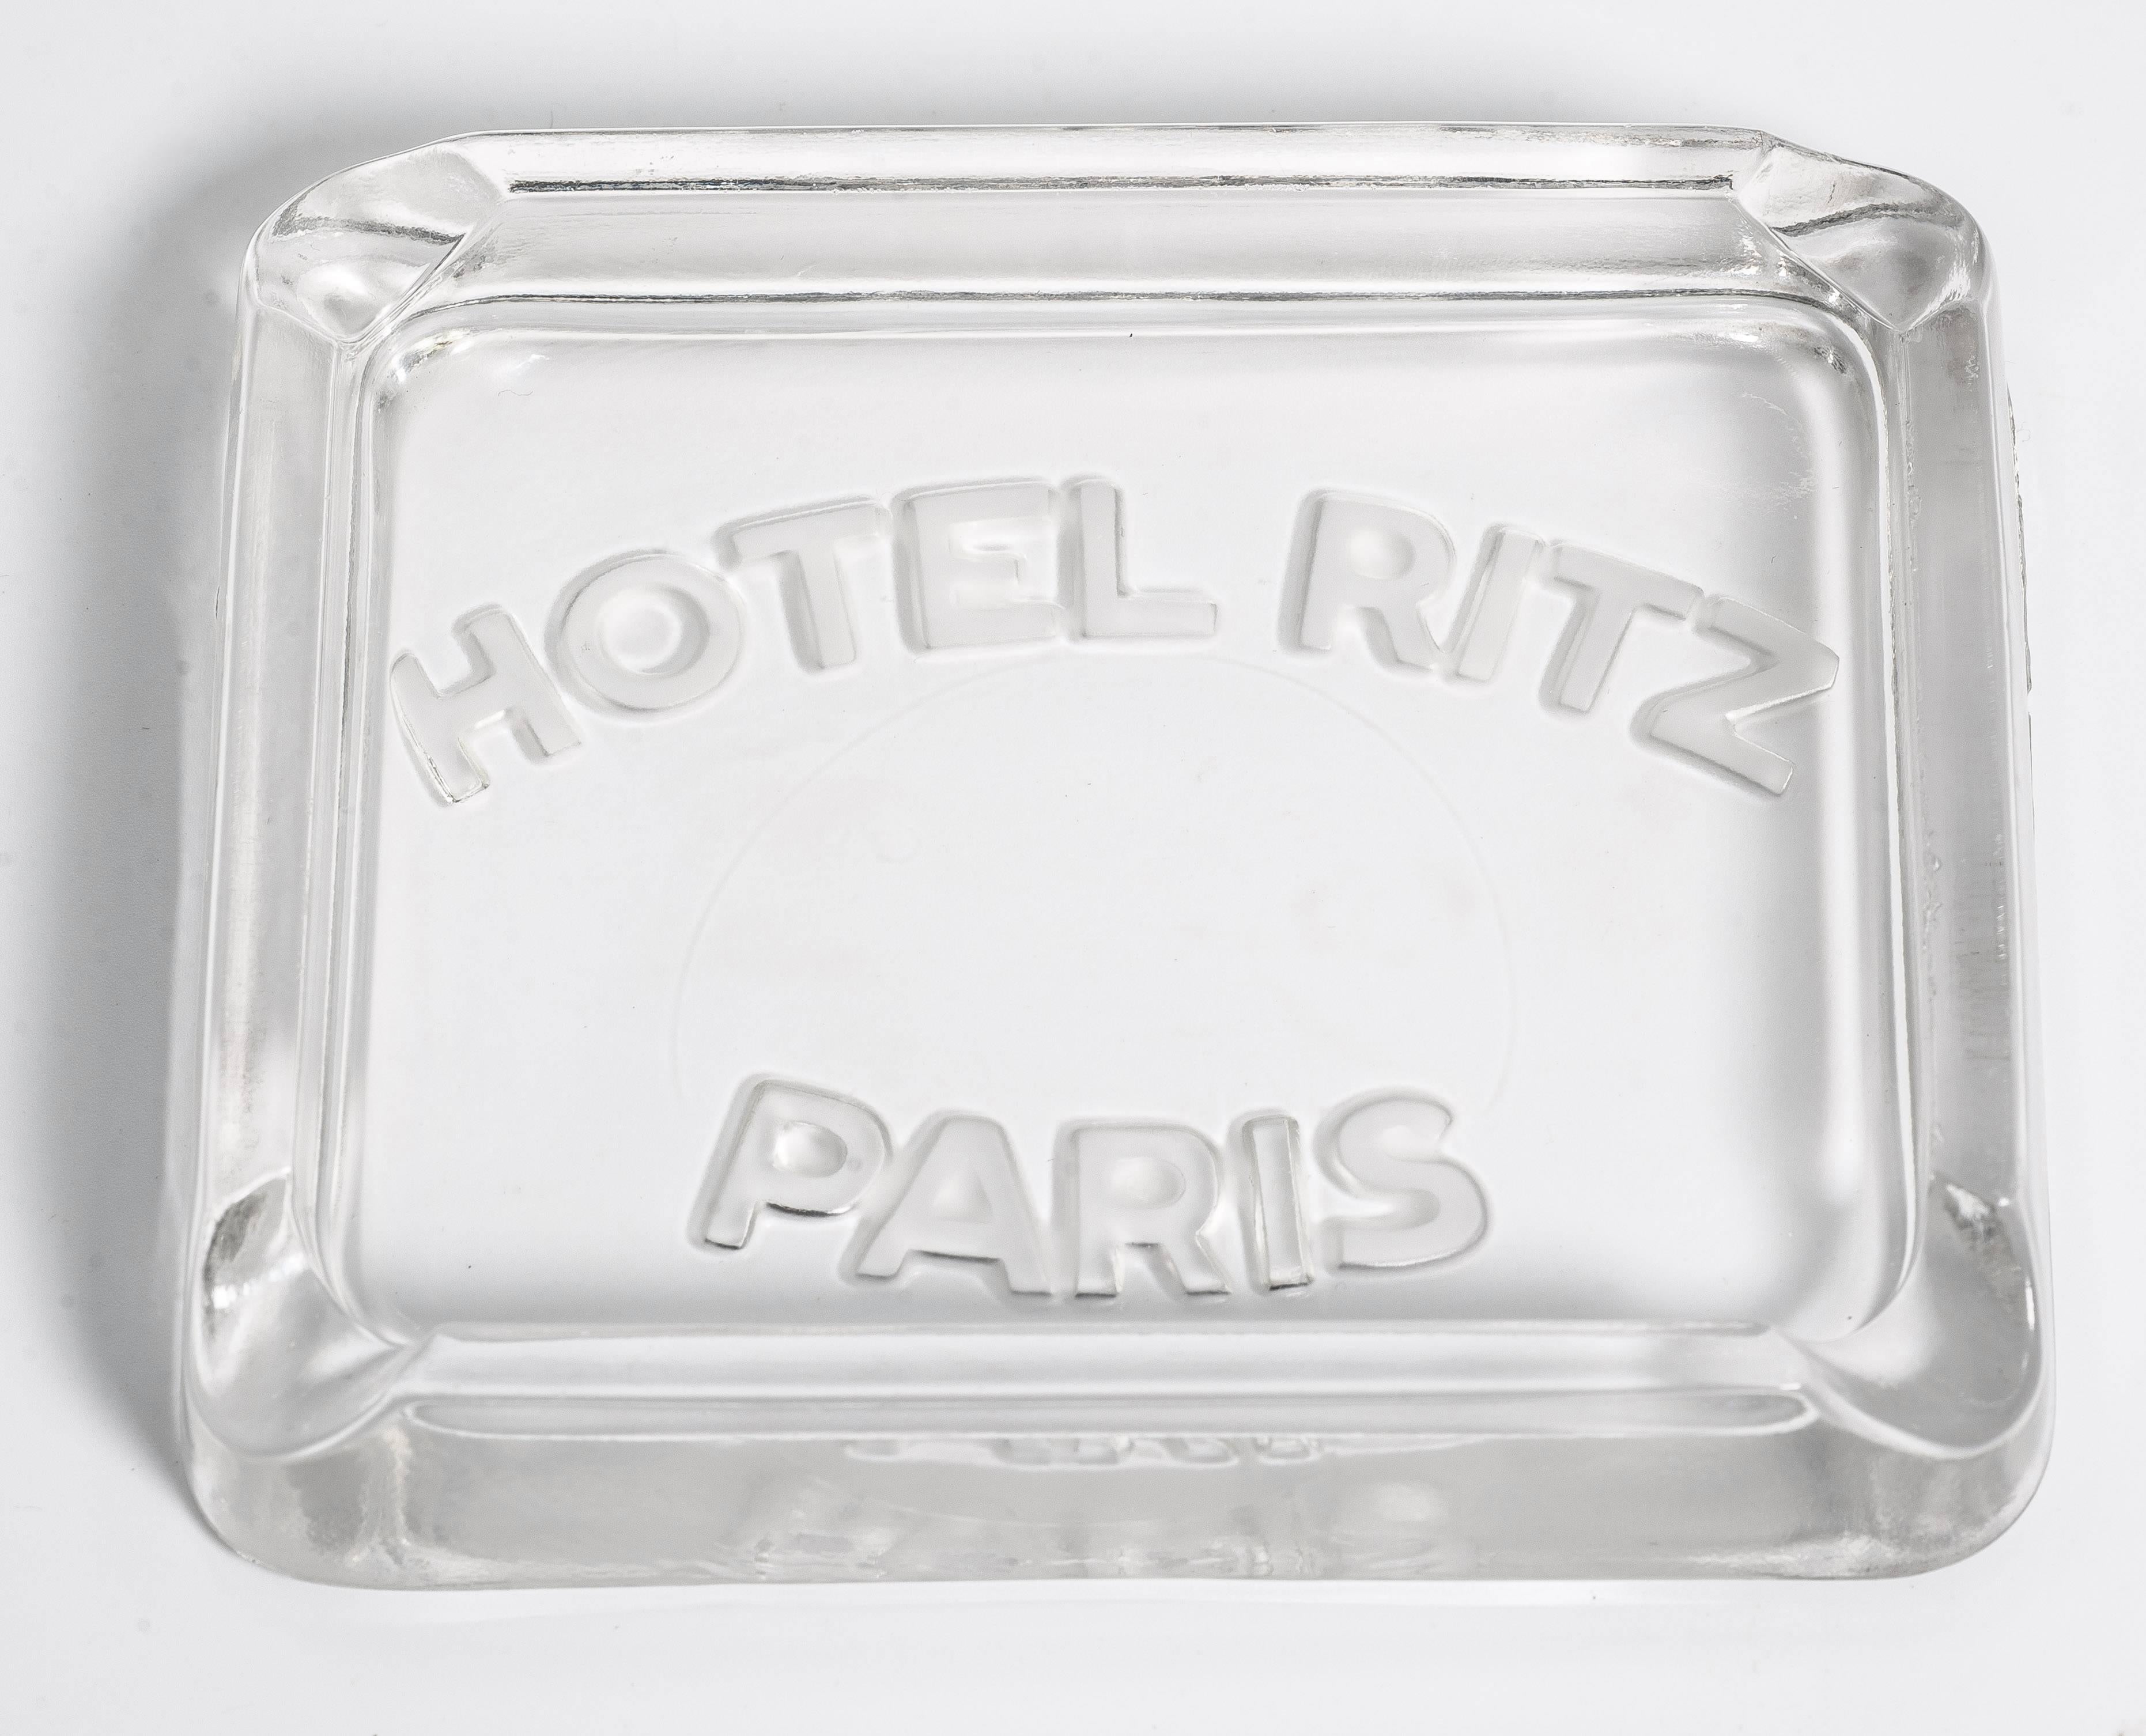 A glass ashtray souvenir from the 1940s Hotel Ritz, Paris. A chic table-top accessory that might imply you were staying at the world's best hotel over 50 years ago. Guaranteed to be remarked upon by guests.

This has a royal Indian provenance to